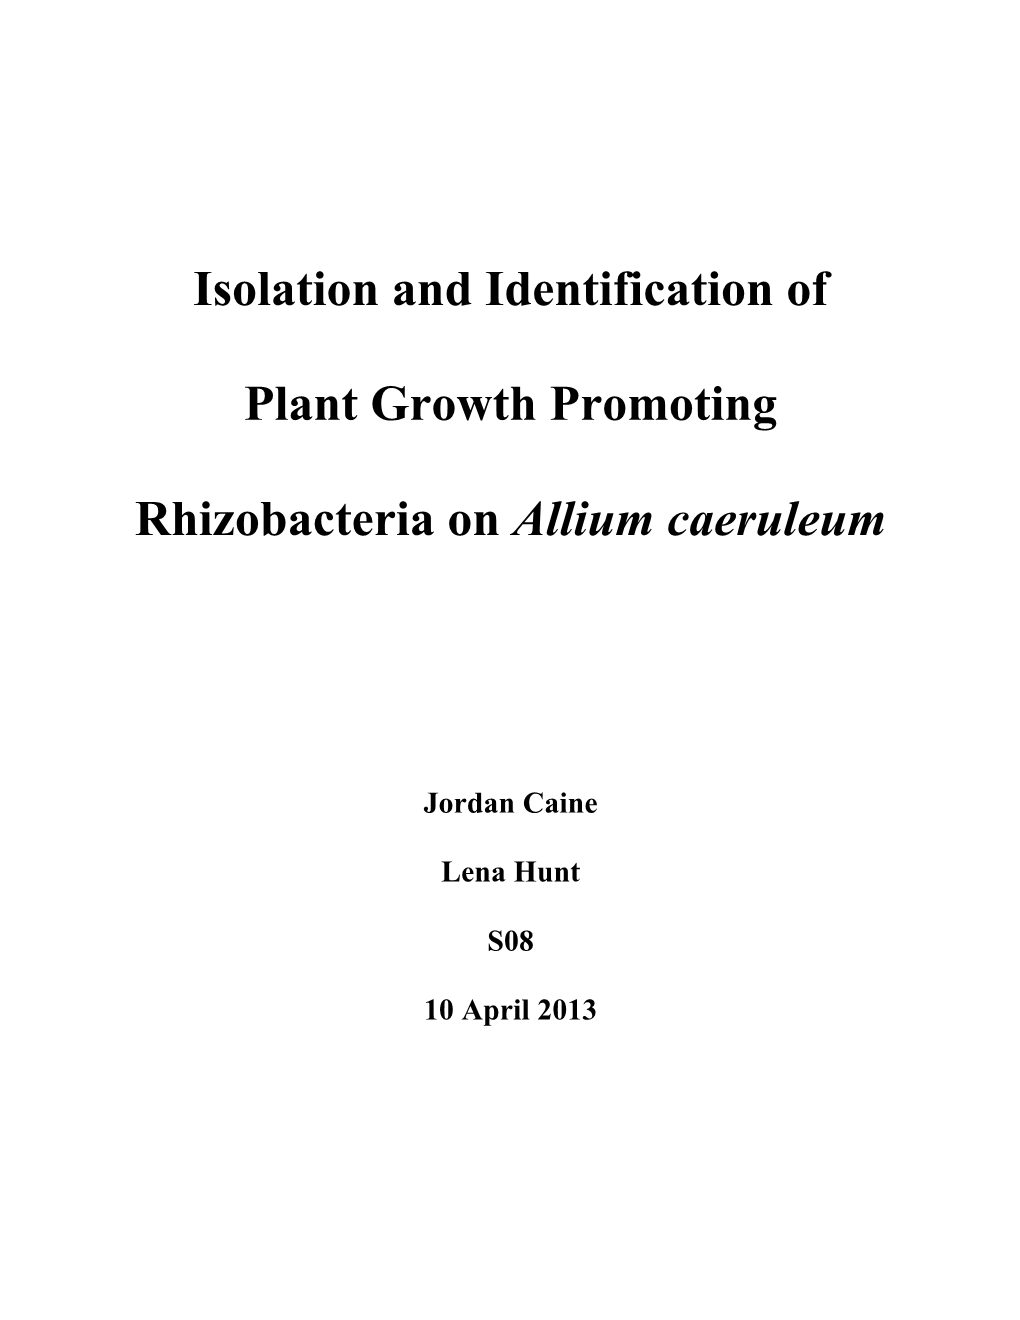 Isolation and Identification of Plant Growth Promoting Rhizobacteria On